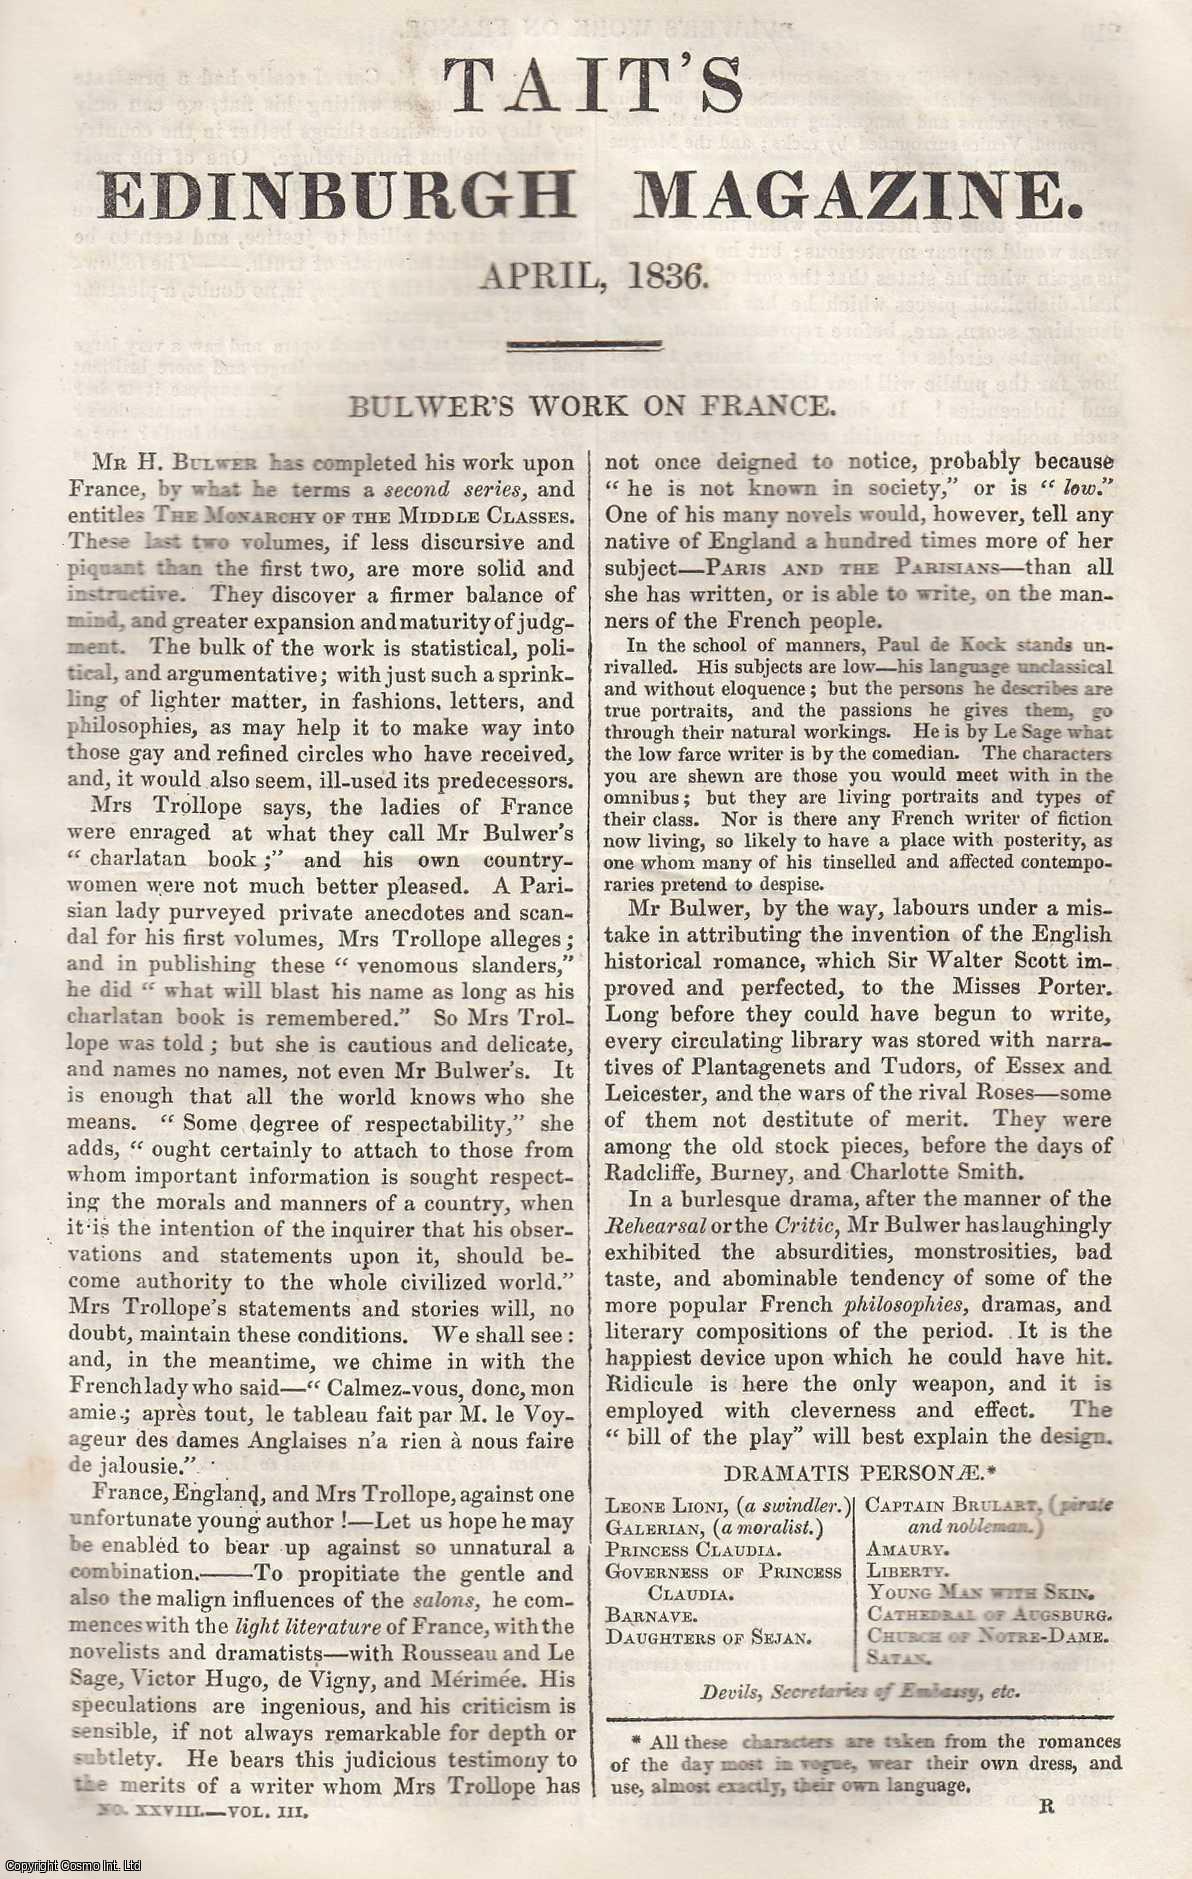 Johnstone, Christian - Bulwer's Work on France, The Monarchy of the Middle Classes. An original article from Tait's Edinburgh Magazine, 1836.